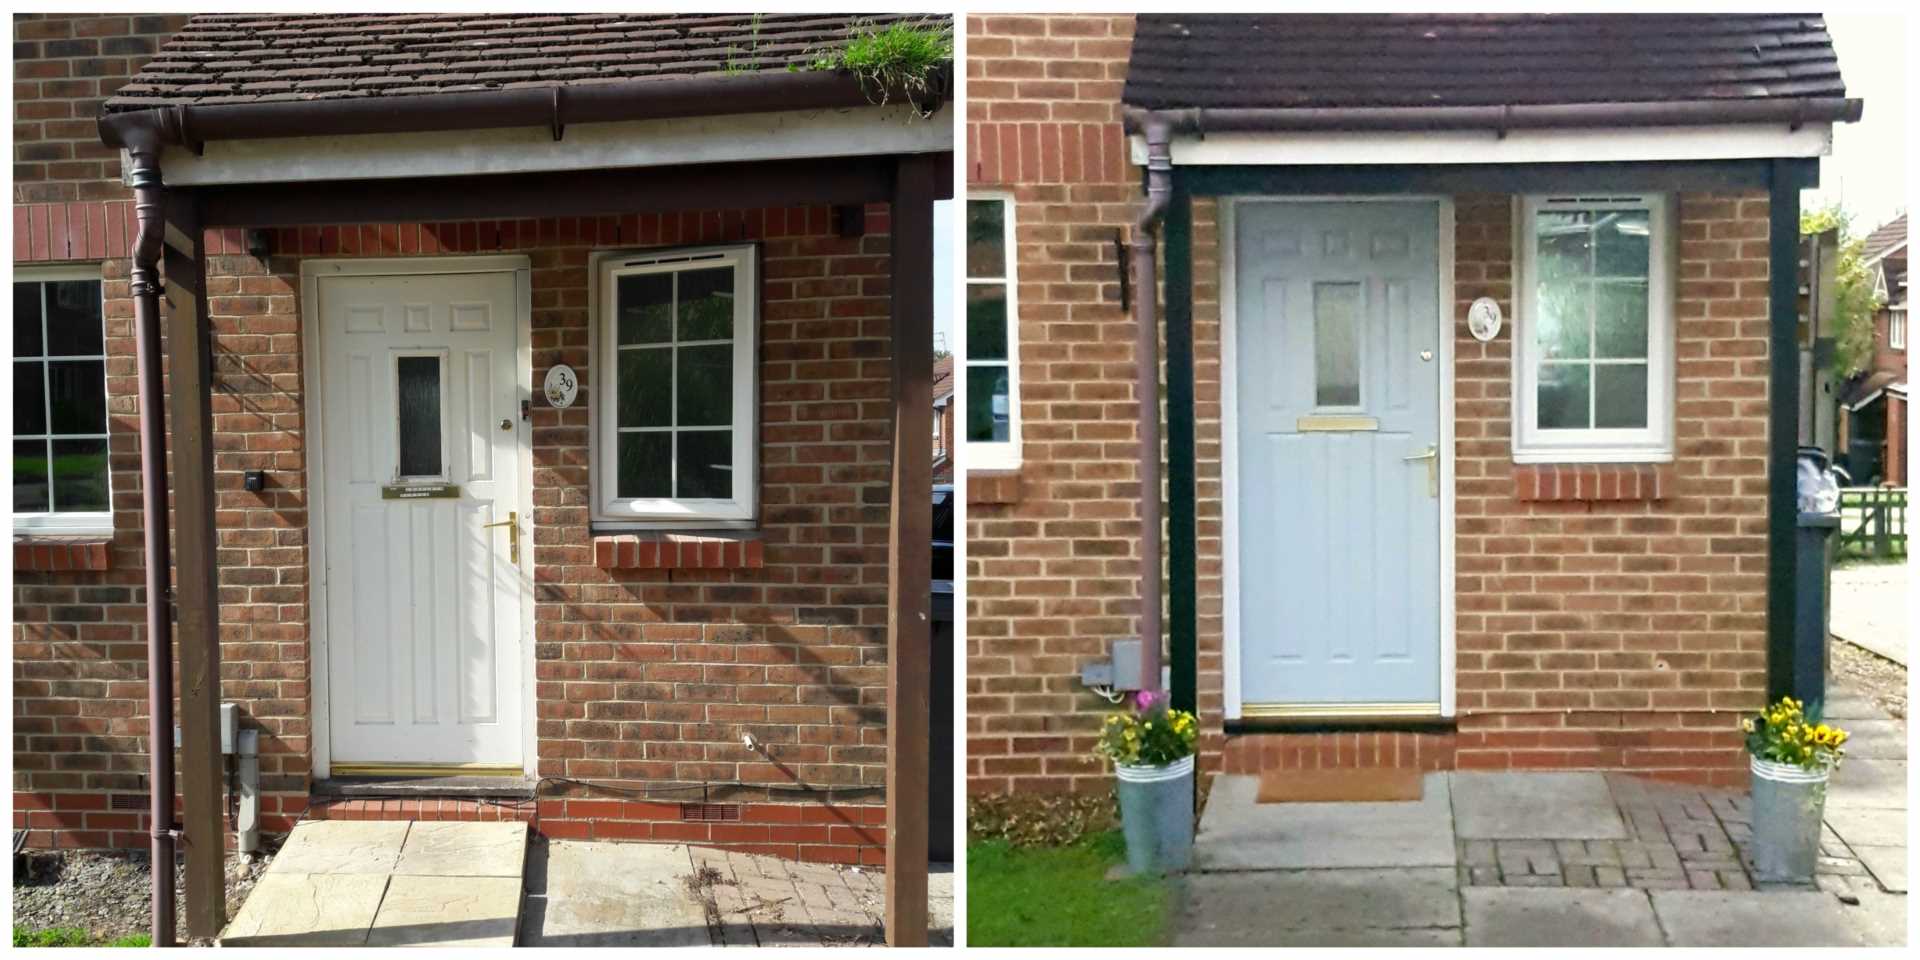 Curb Appeal – which door would you prefer to go through?